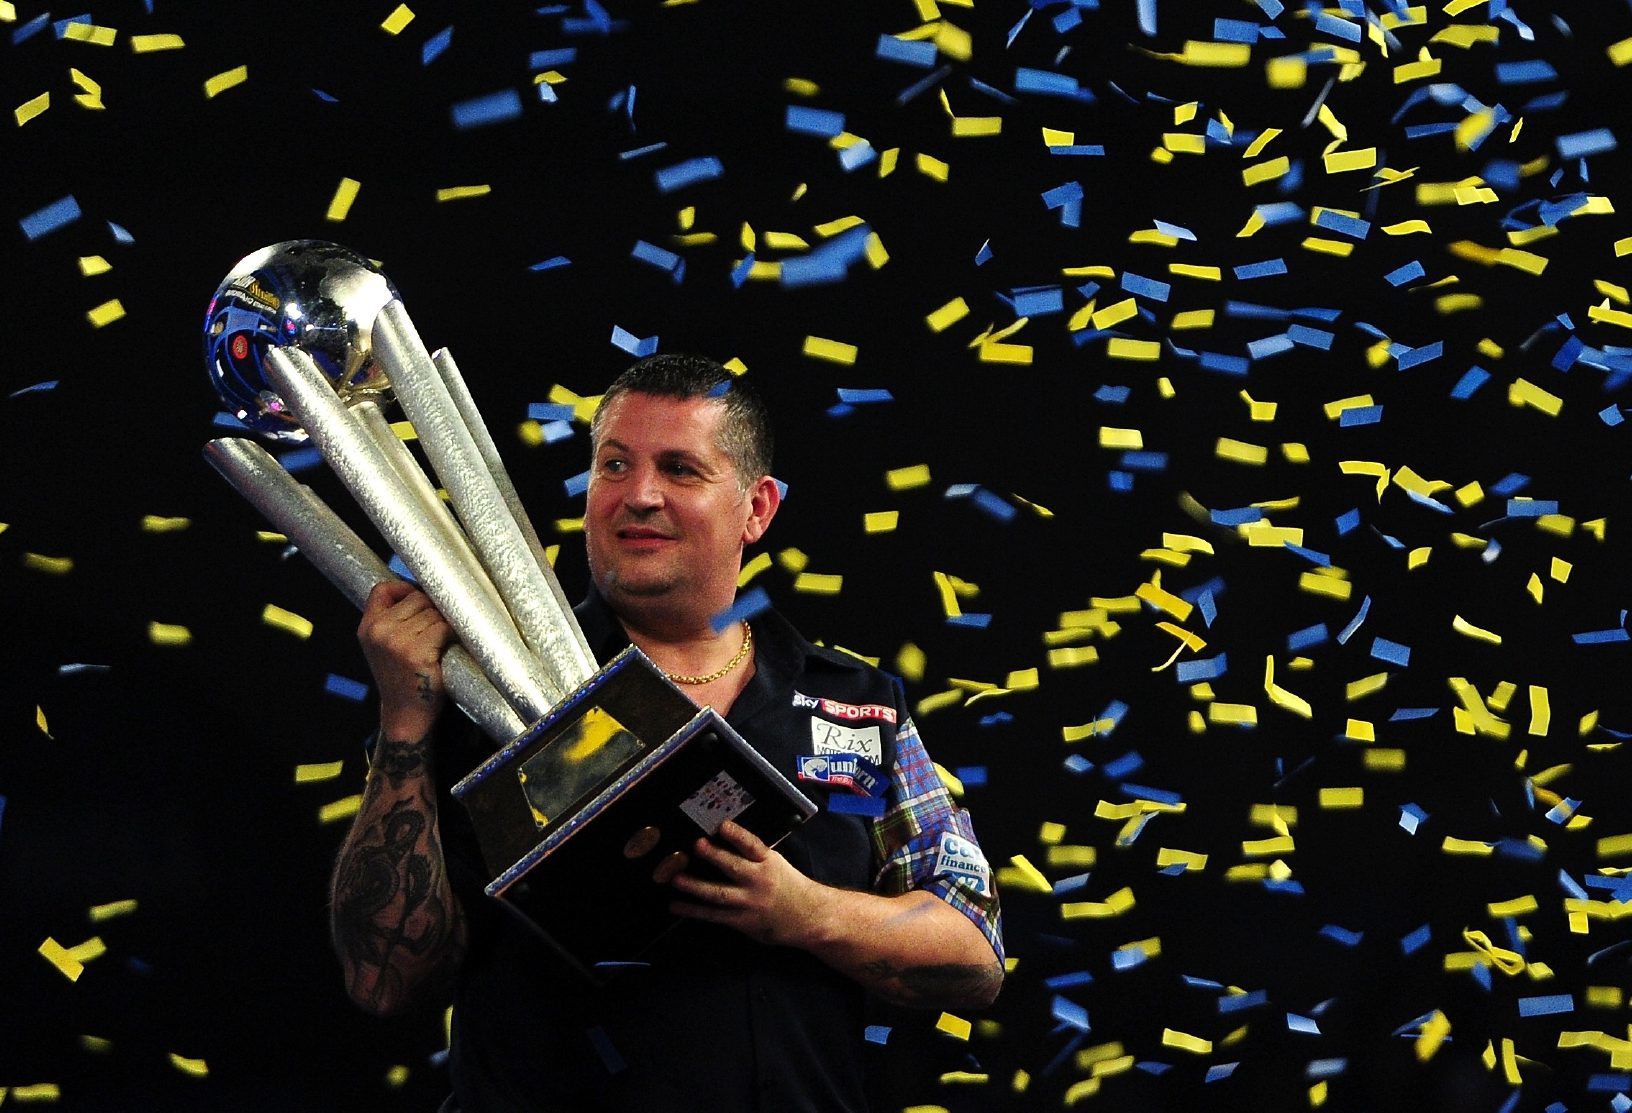 Gary Anderson the other one) celebrates with the Sid Waddell Trophy after defeating Adrian Lewis of England in the final match during Day Fifteen of the 2016 William Hill PDC World Darts Championships